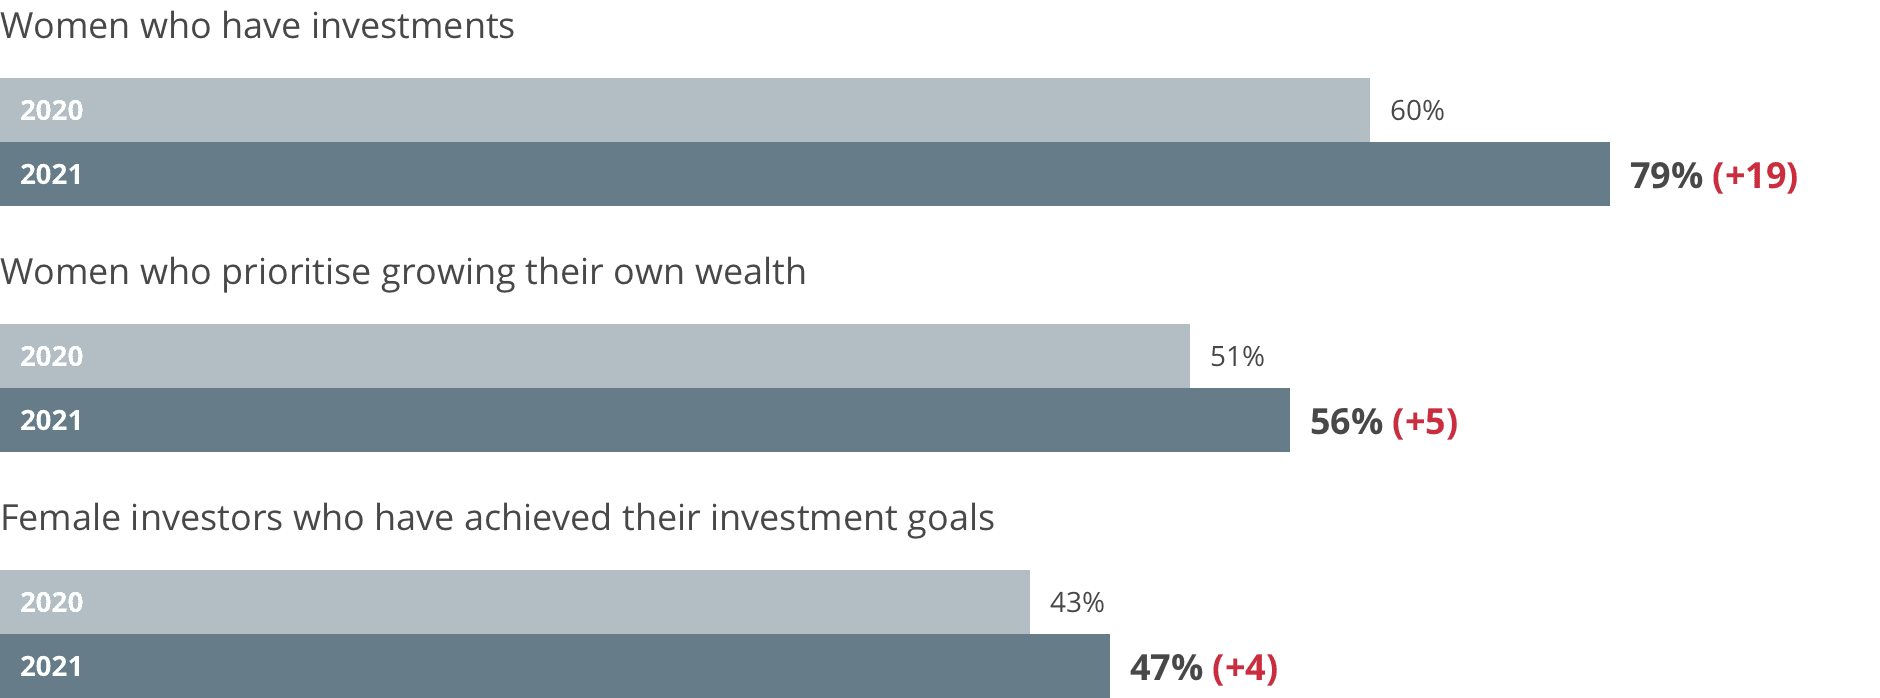 Women and wealth 2021 index -1